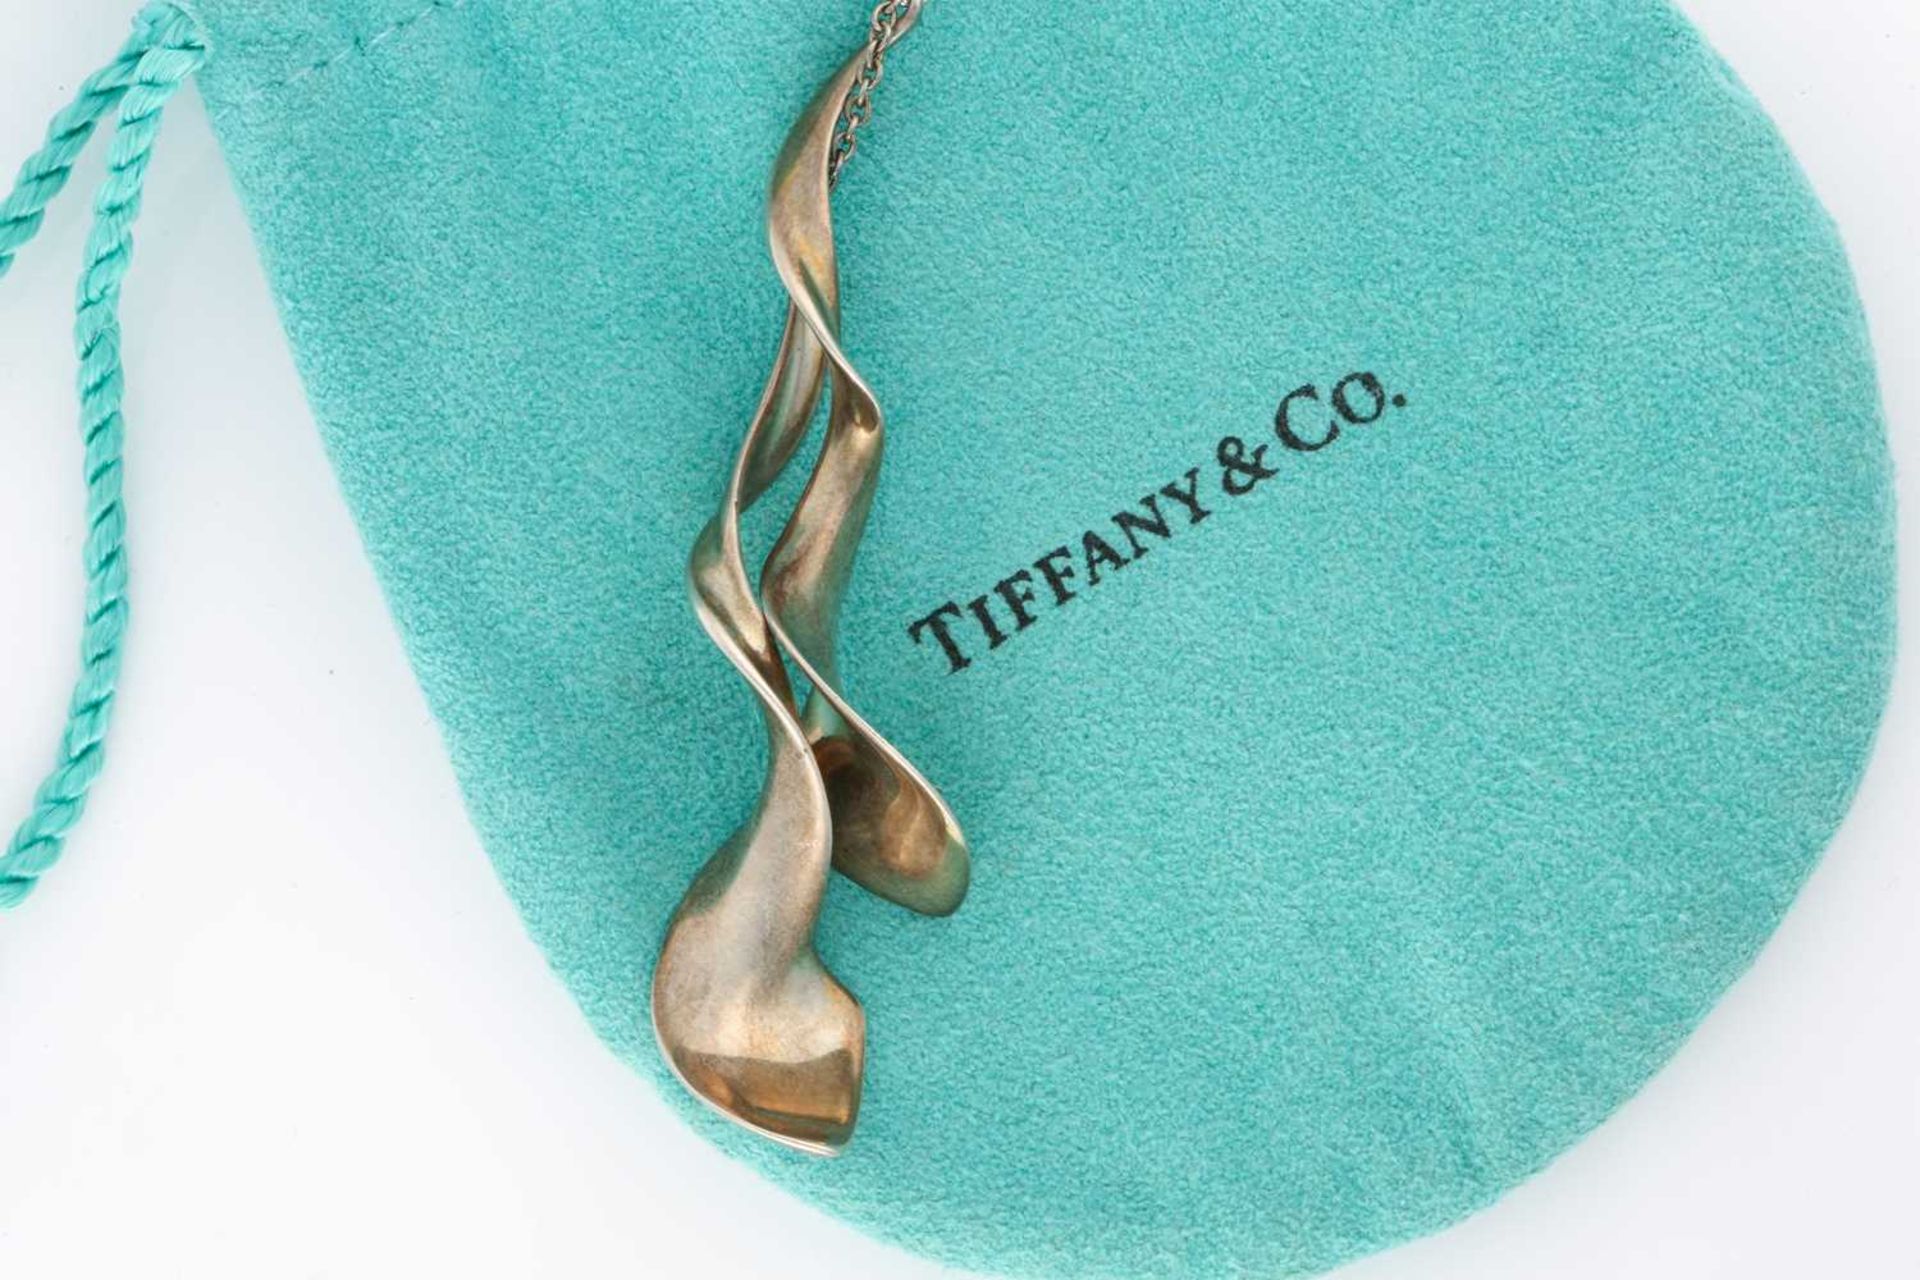 Tiffany & Co. - 'Orchid' double drop pendant necklace, of twisted organic form, designed by Frank - Image 5 of 5